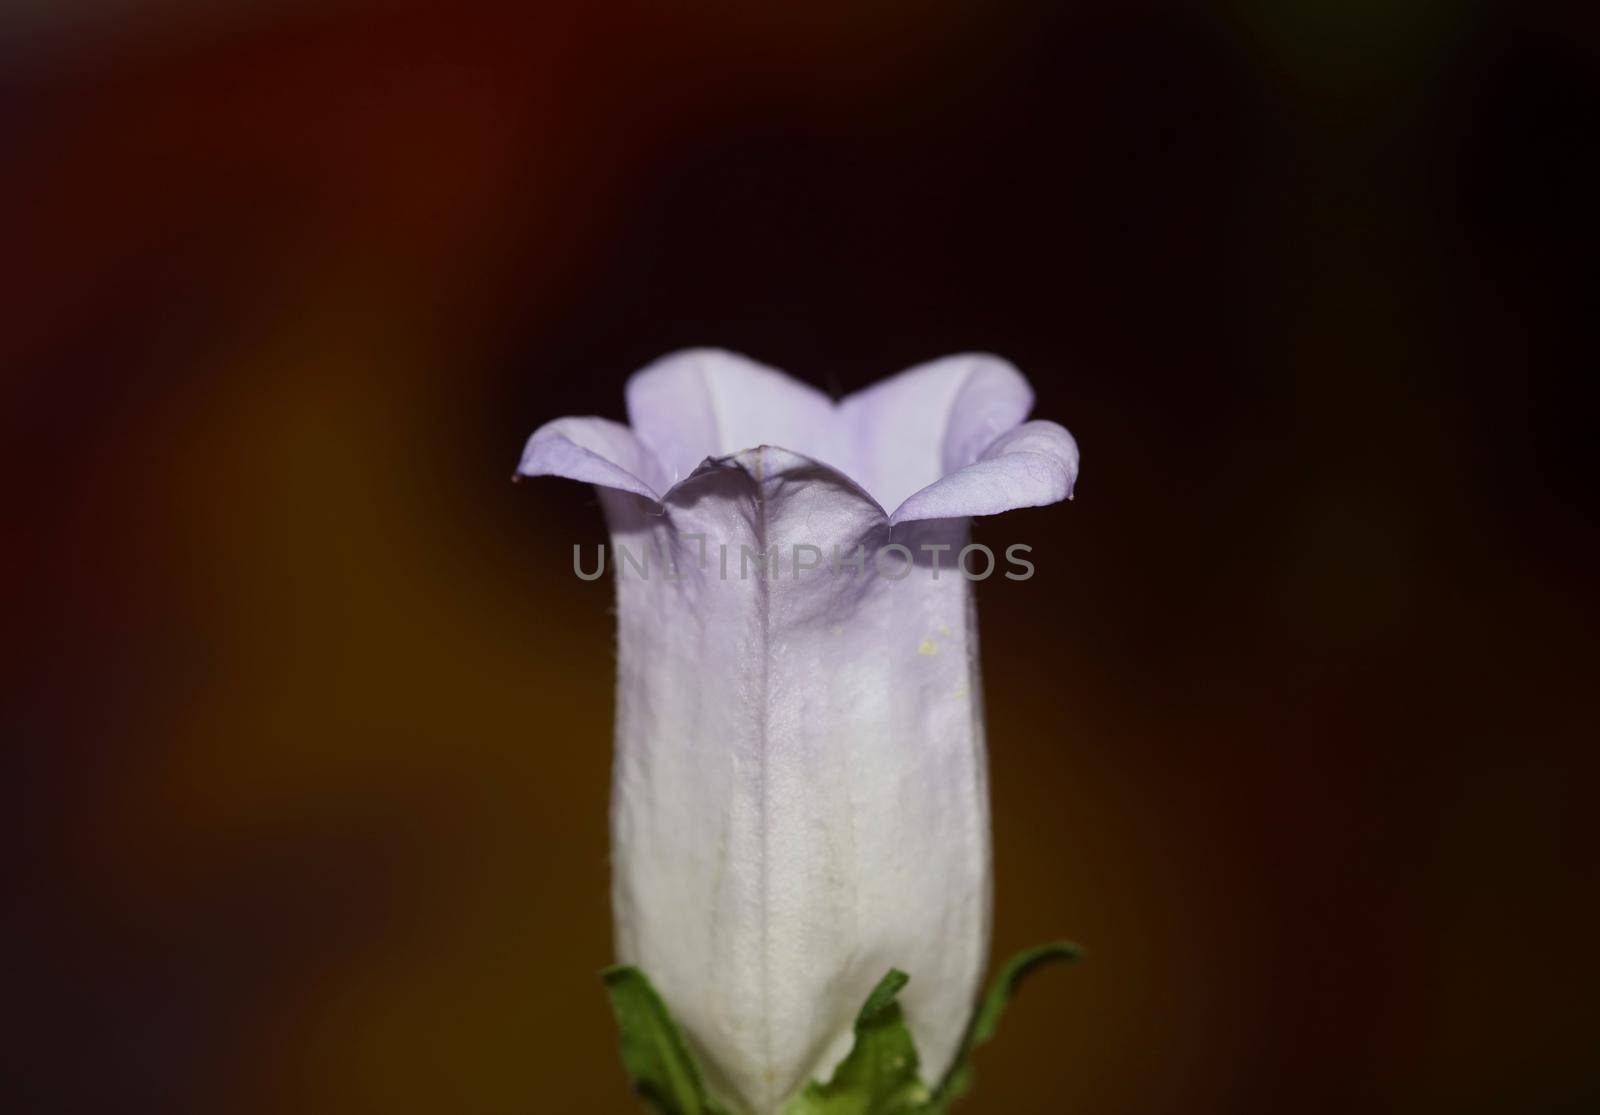 Flower blossom close up Campanula medium family campanulaceae high quality big size print shop wall posters home decor natural plants